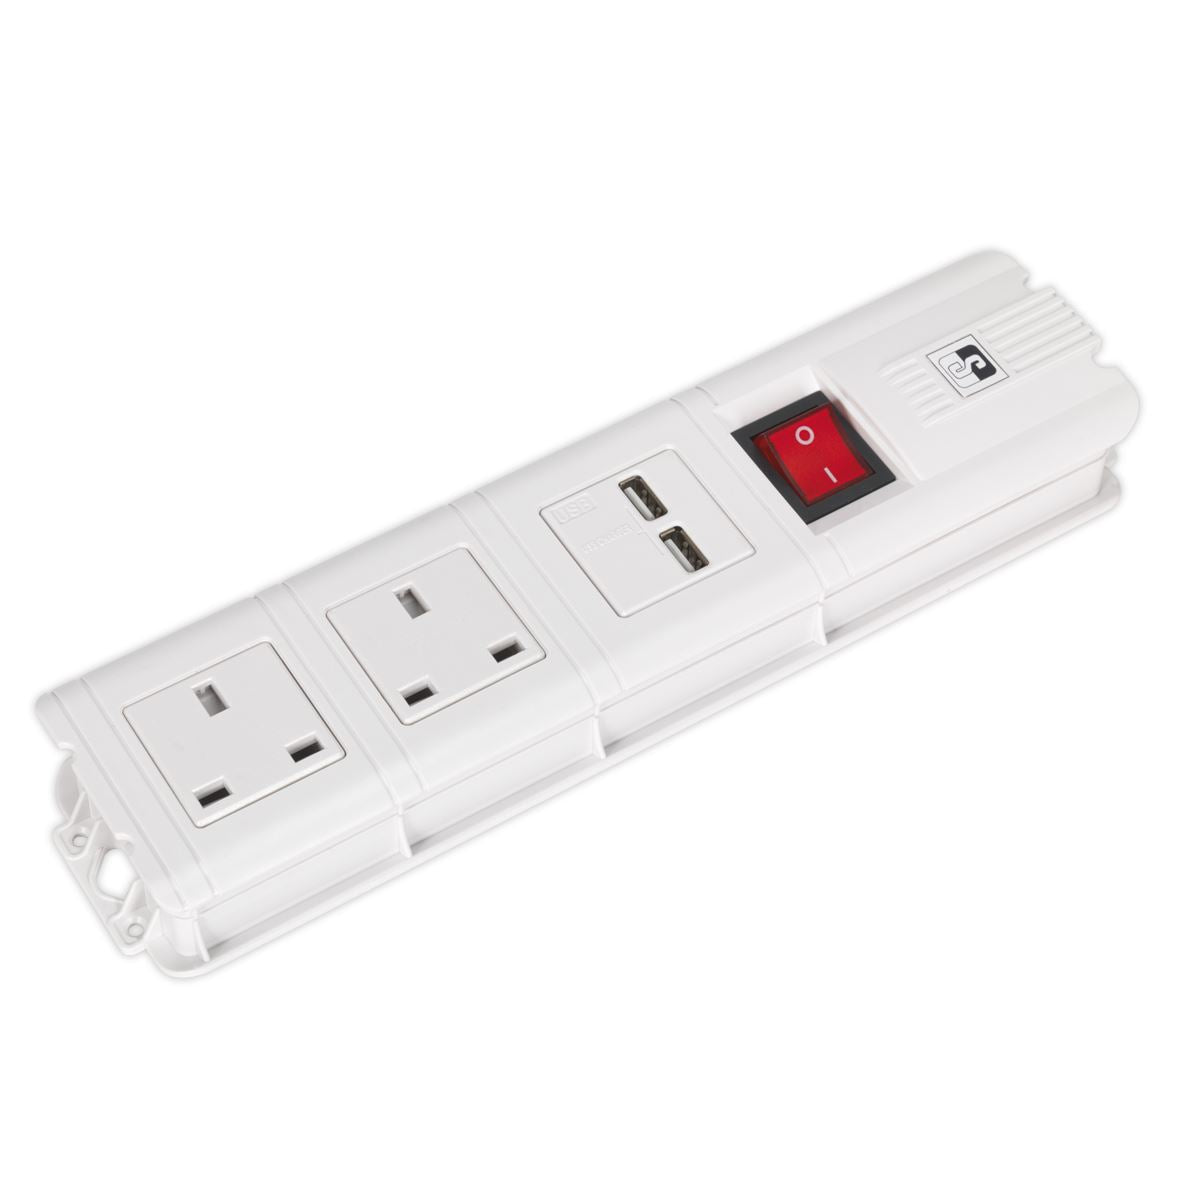 Sealey Extension Cable 2.6m 2 x 230V + 2 x USB Sockets - White